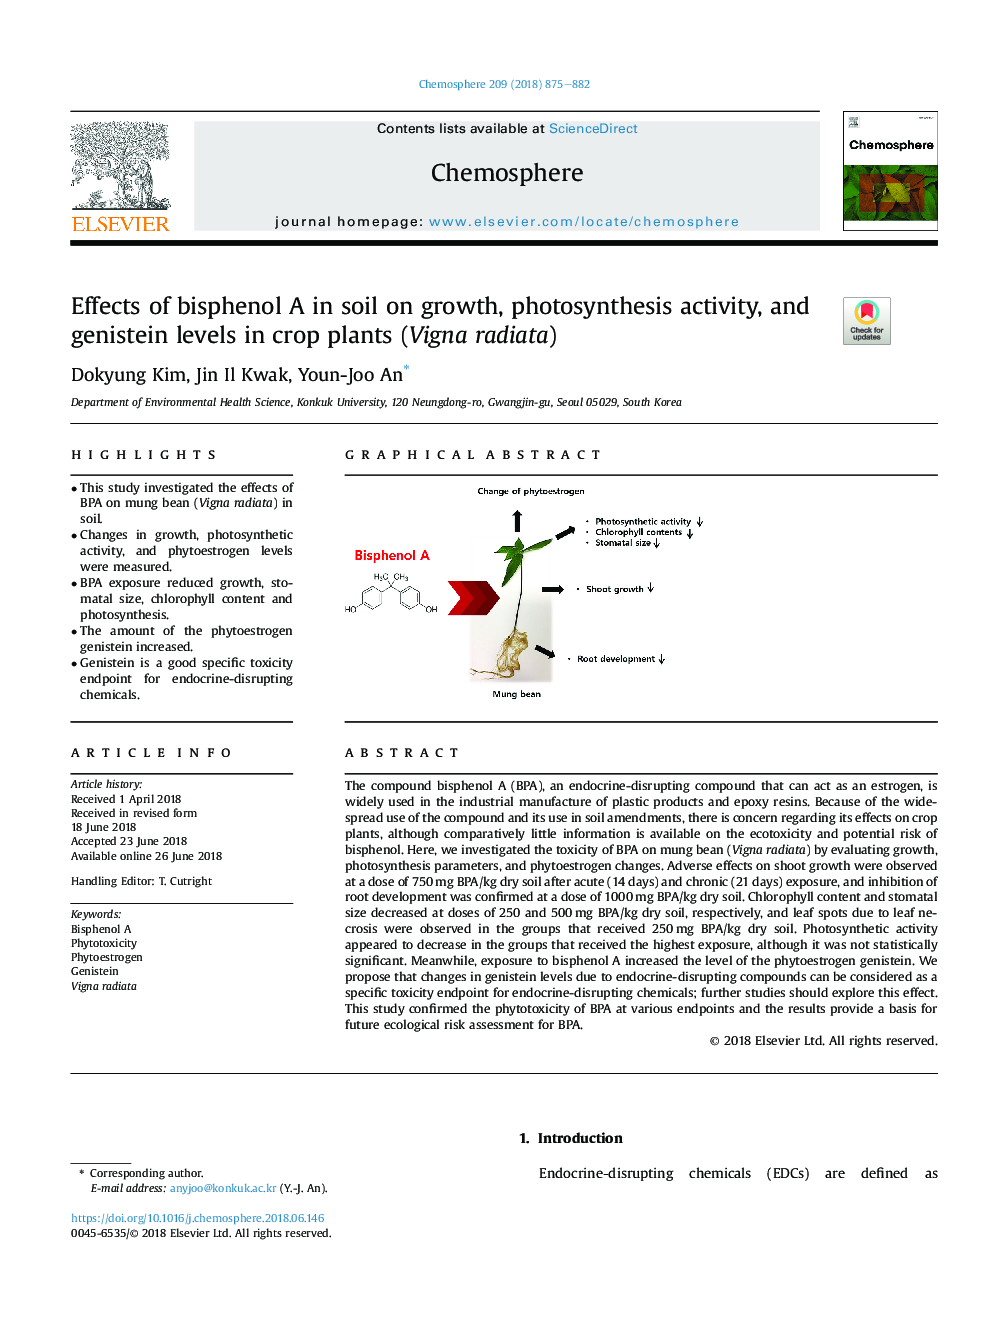 Effects of bisphenol A in soil on growth, photosynthesis activity, and genistein levels in crop plants (Vigna radiata)